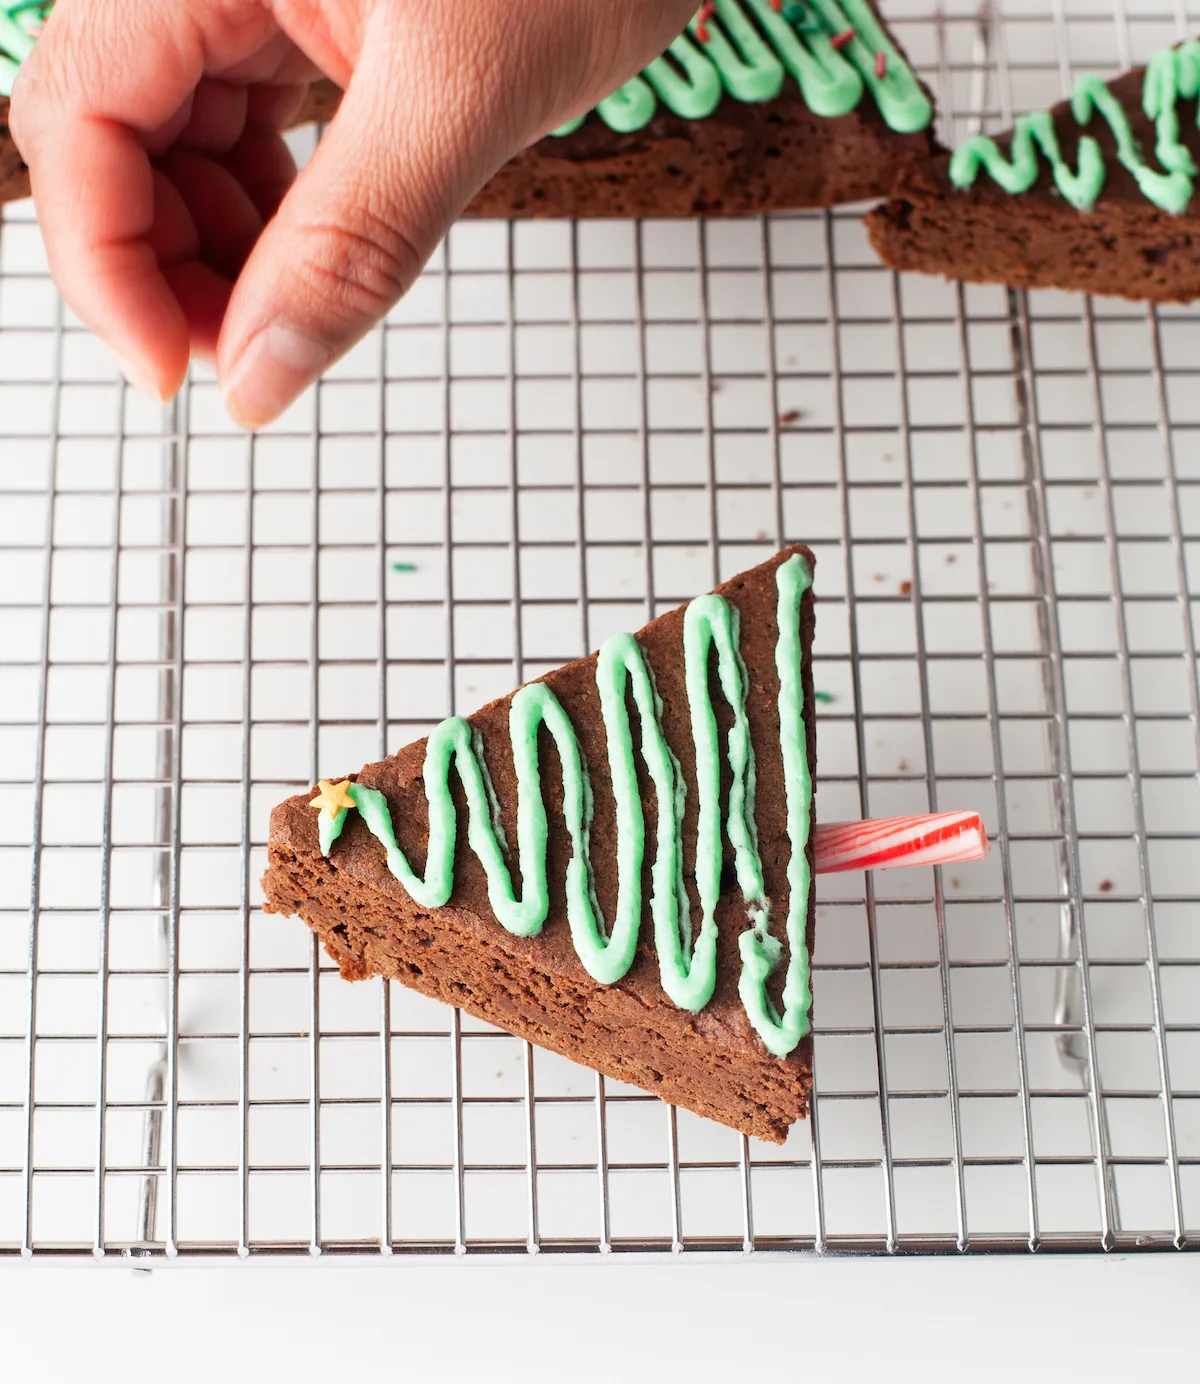 Adding the Christmas sprinkles to the top of the green frosting on the brownie